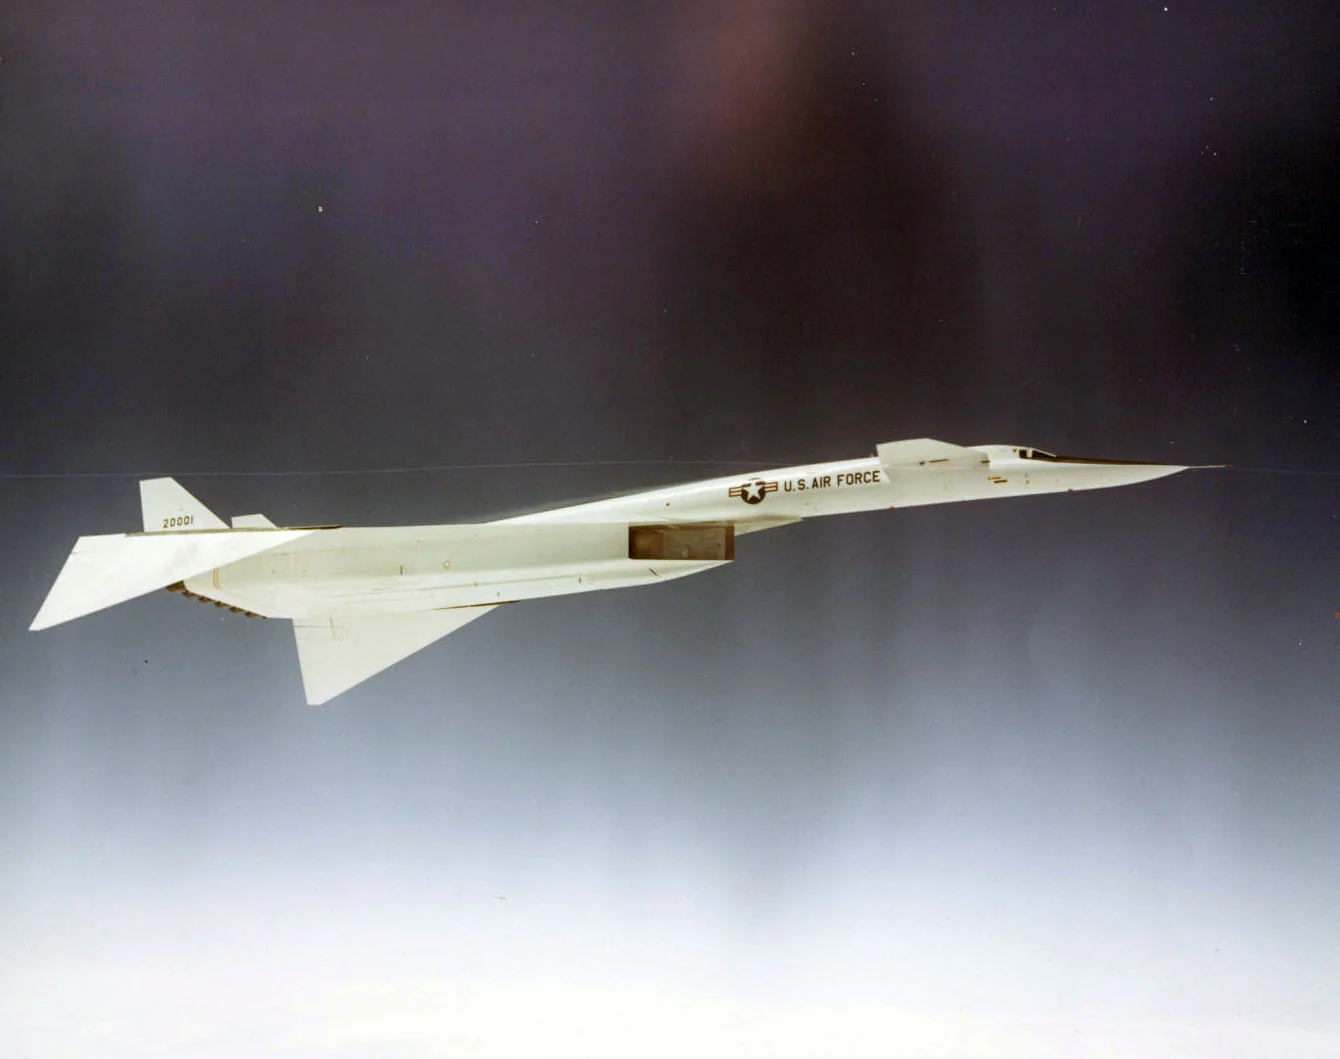 XB-70s folding wingtips made use of the compression lift effect